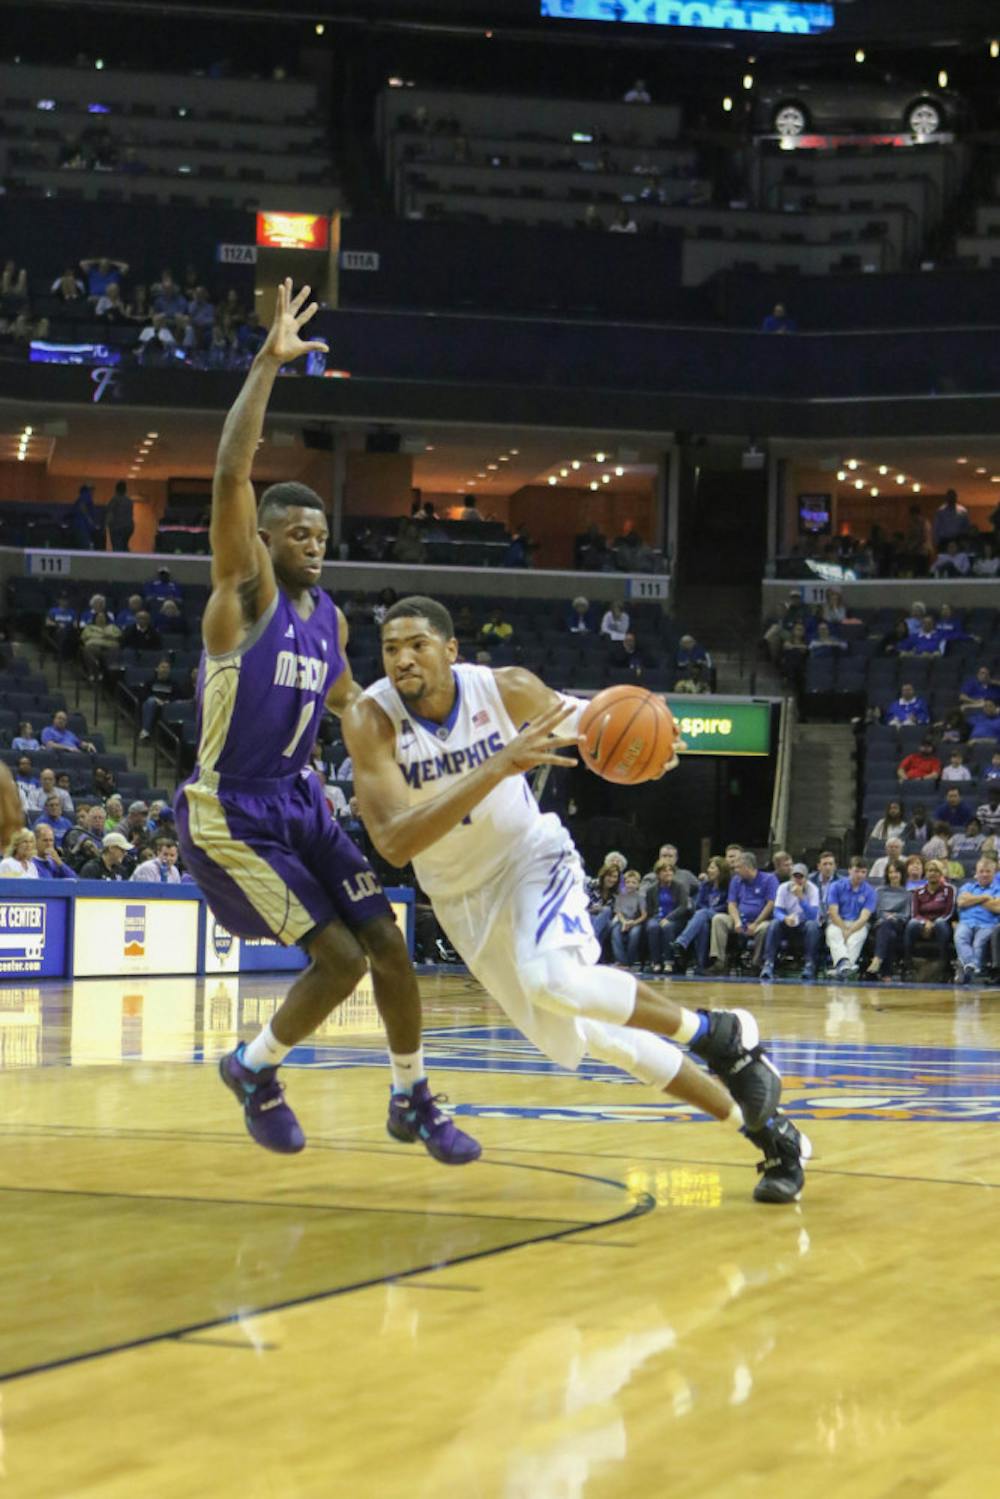 <p>In wins, freshman forward Dedric Lawson is averaging 15.4 points and 9.4 rebounds while shooting 41.5 percent from the field.&nbsp;</p>